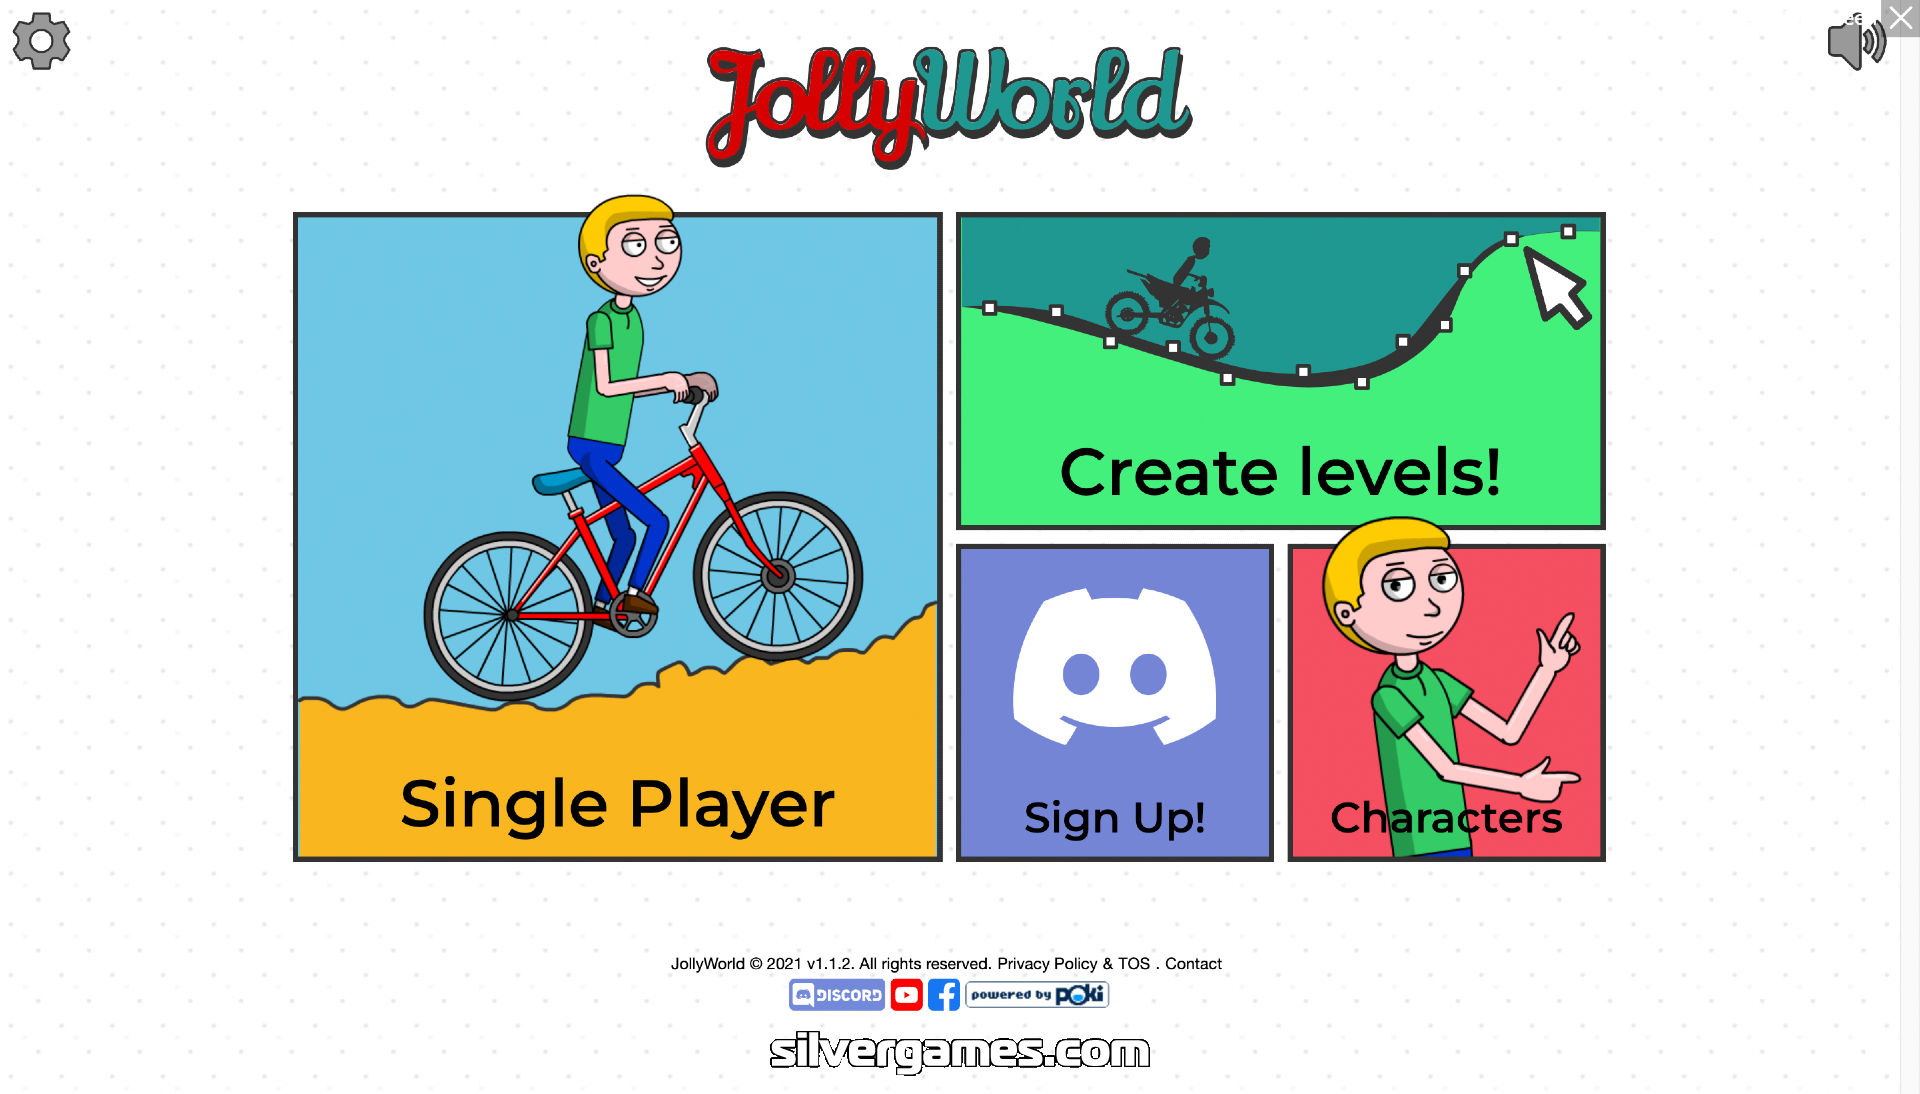 JOLLYWORLD - Play Online for Free!